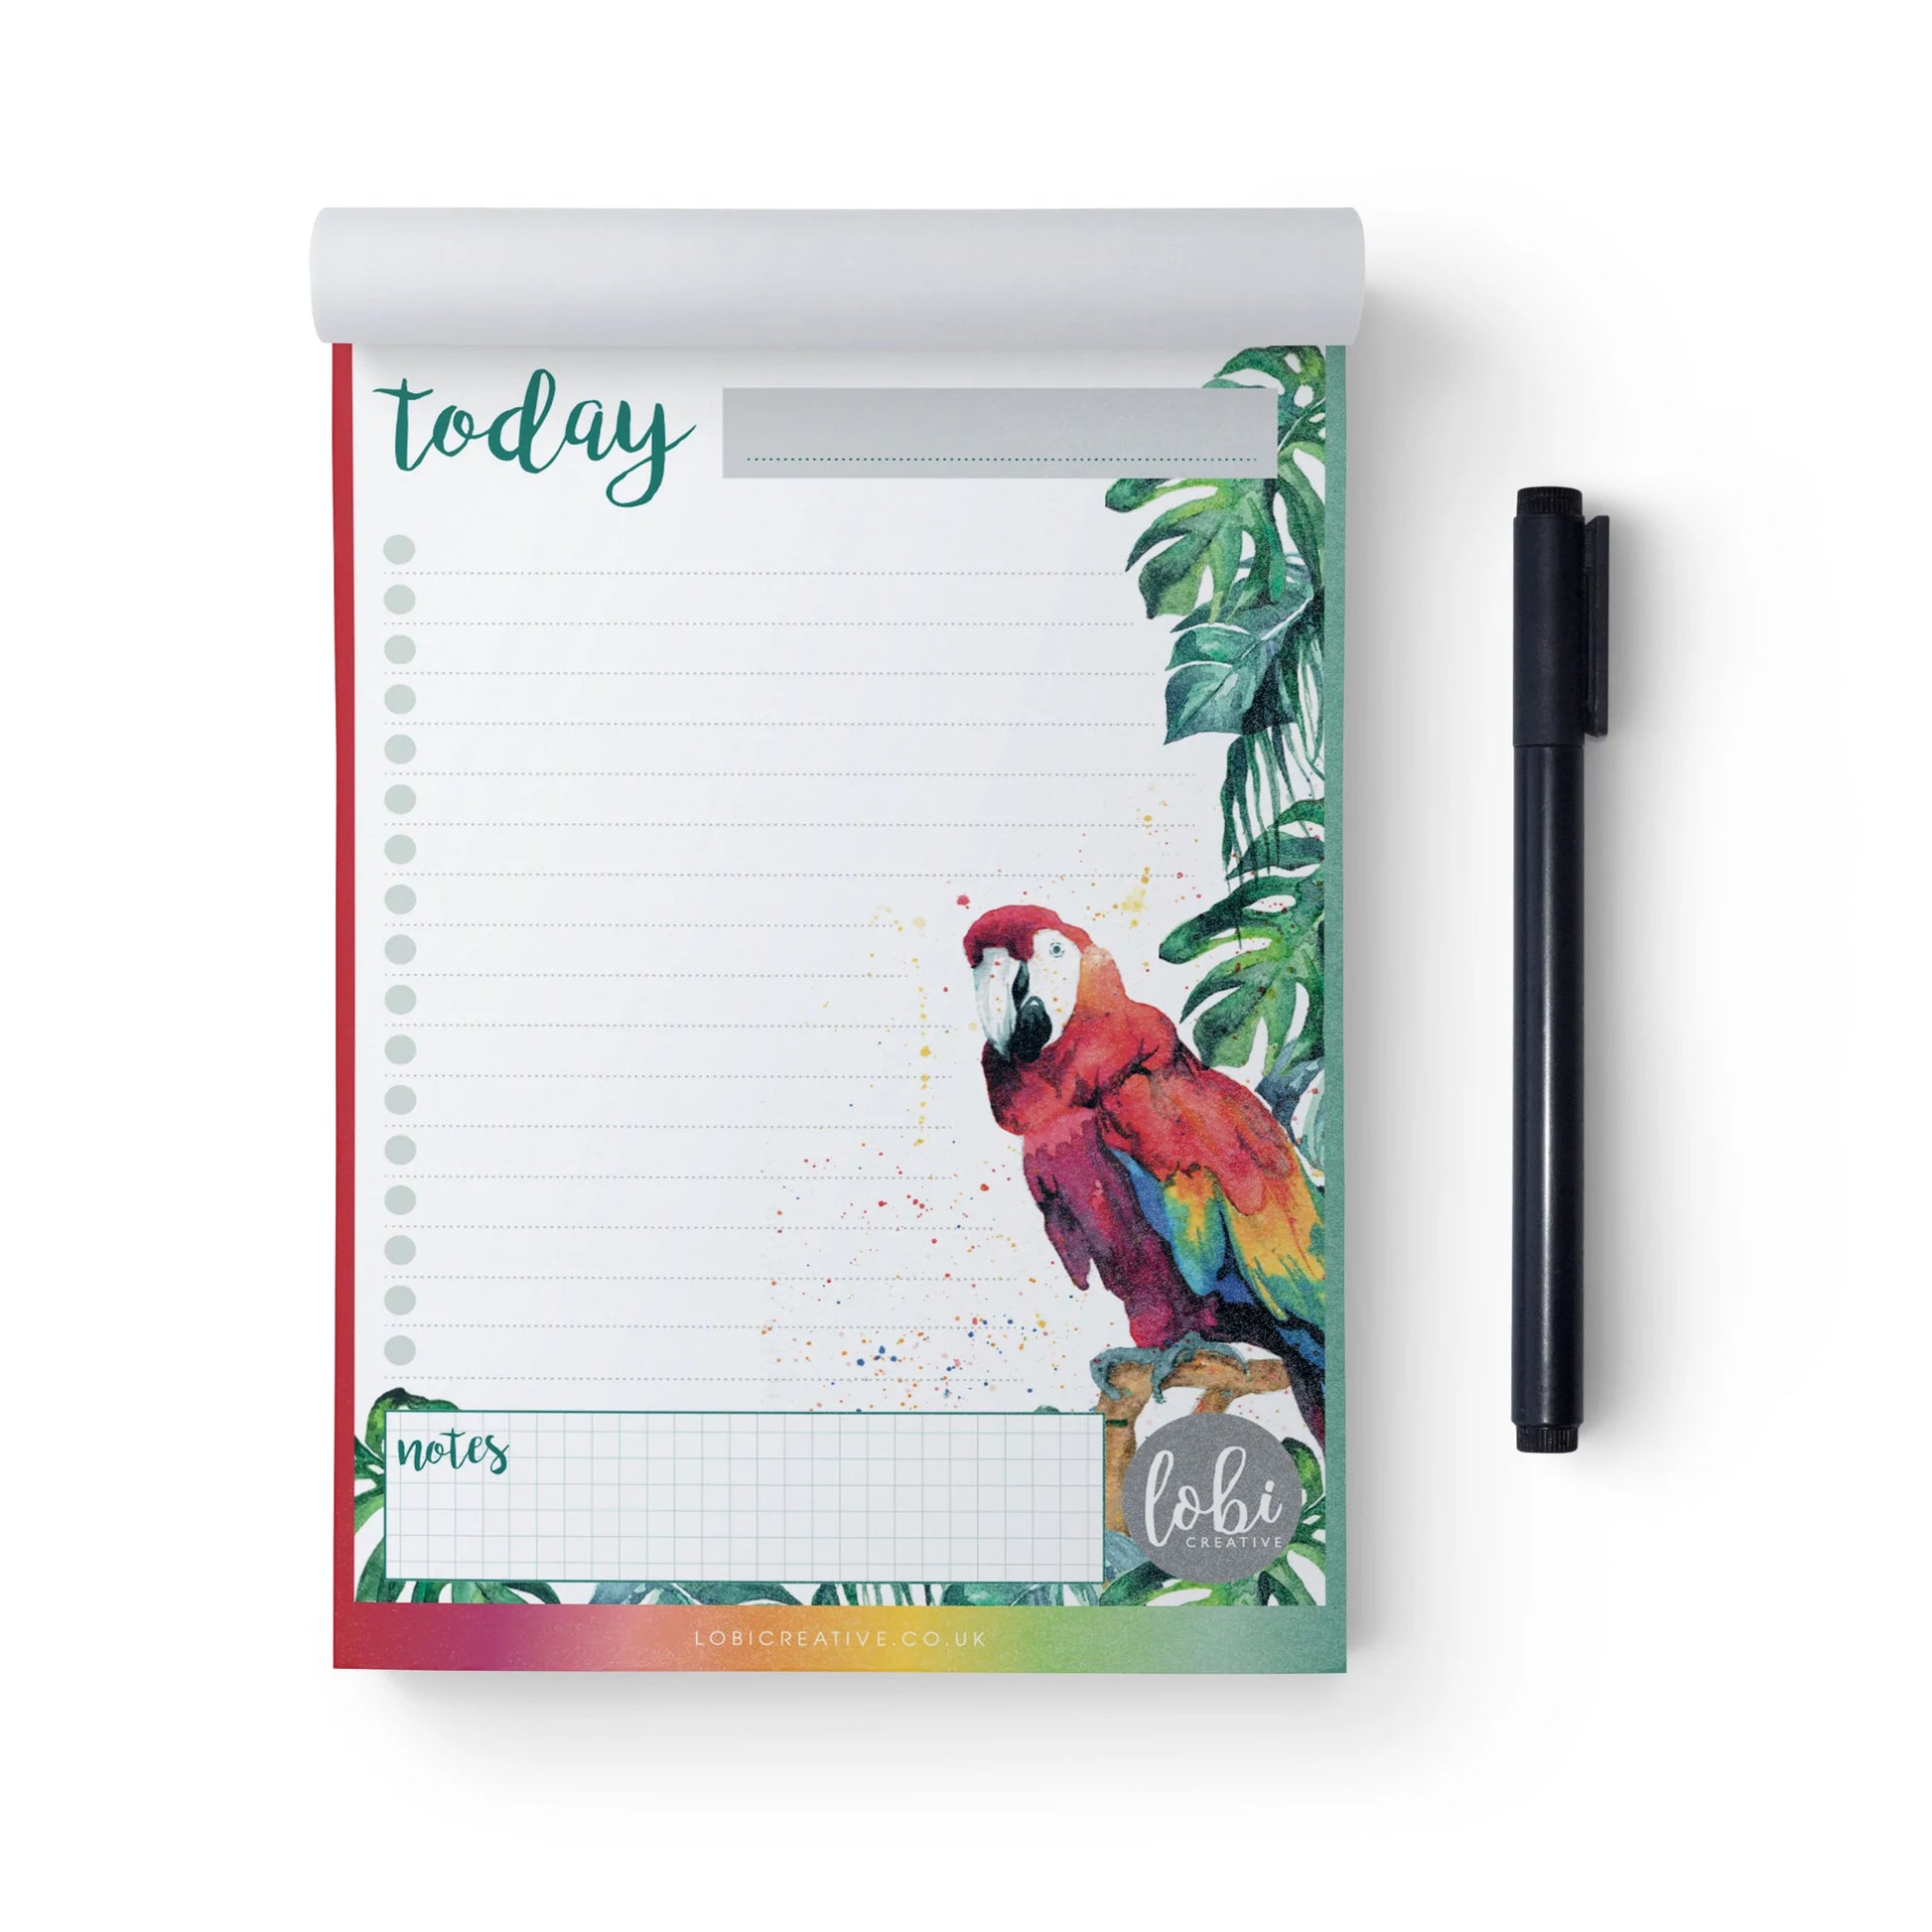 Parrot themed eco friendly notepad for everyday task lists